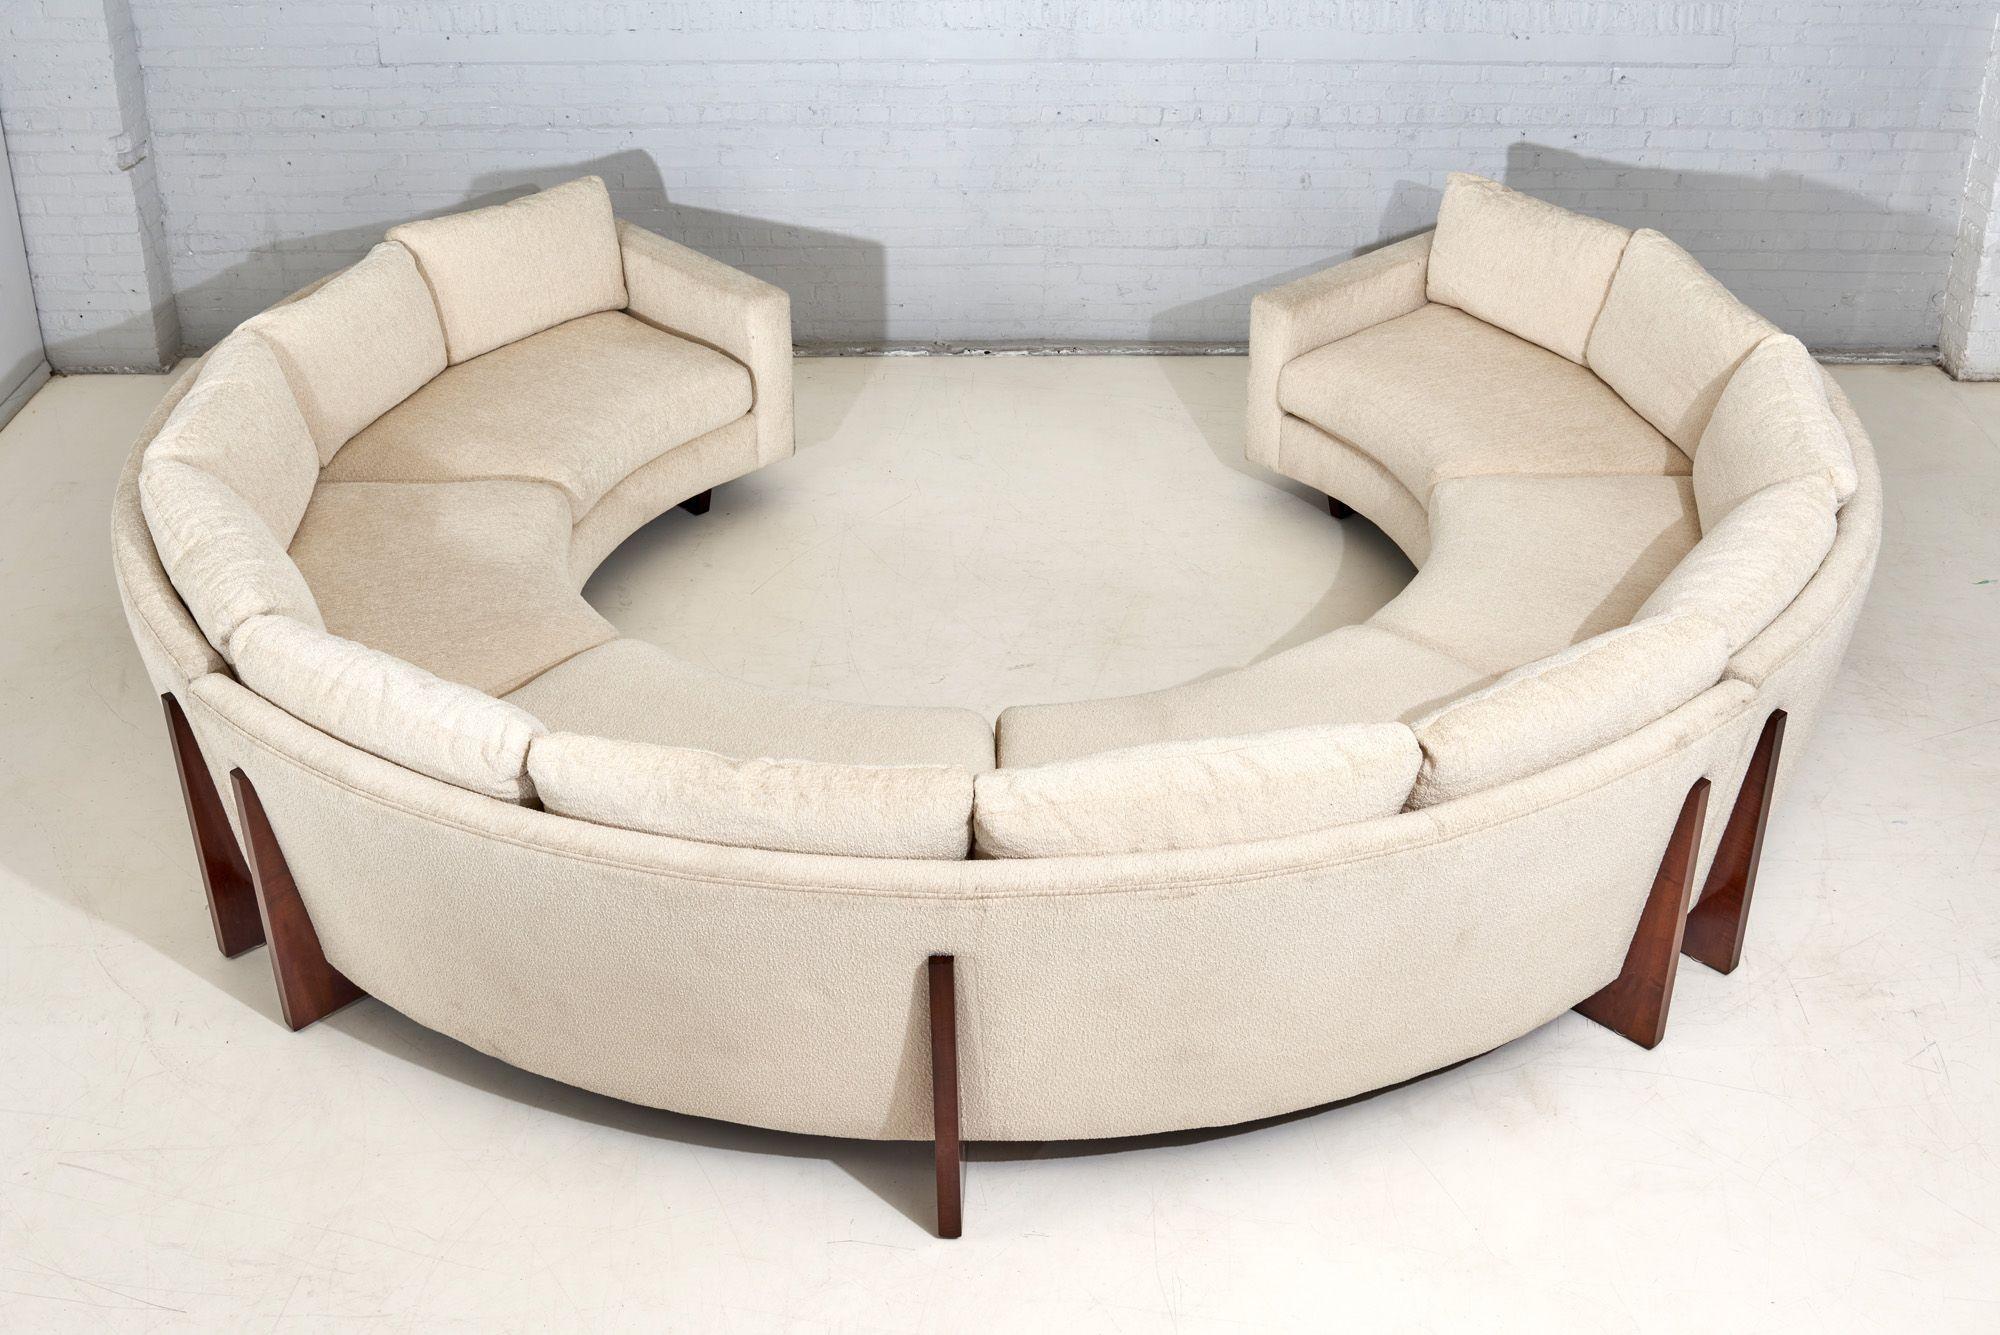 3 Piece Circular Sectional Sofa w/walnut by Ransom Culler for Thayer Coggin 1960 In Good Condition For Sale In Chicago, IL